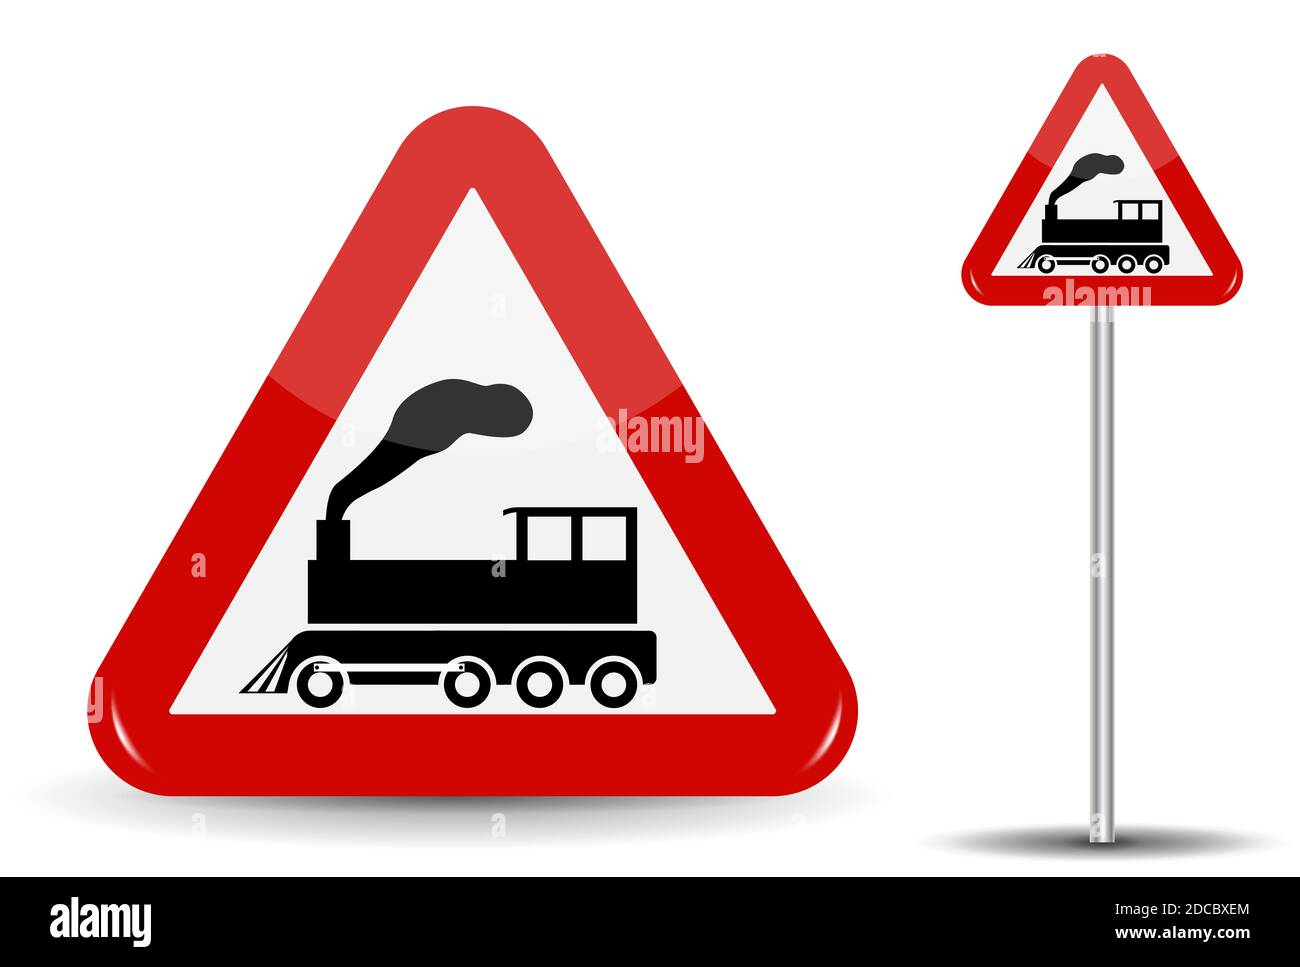 Road sign Warning Railway crossing without barrier. In Red Triangle is a schematic depiction of a steam locomotive in motion with smoke. Illustration. Stock Photo